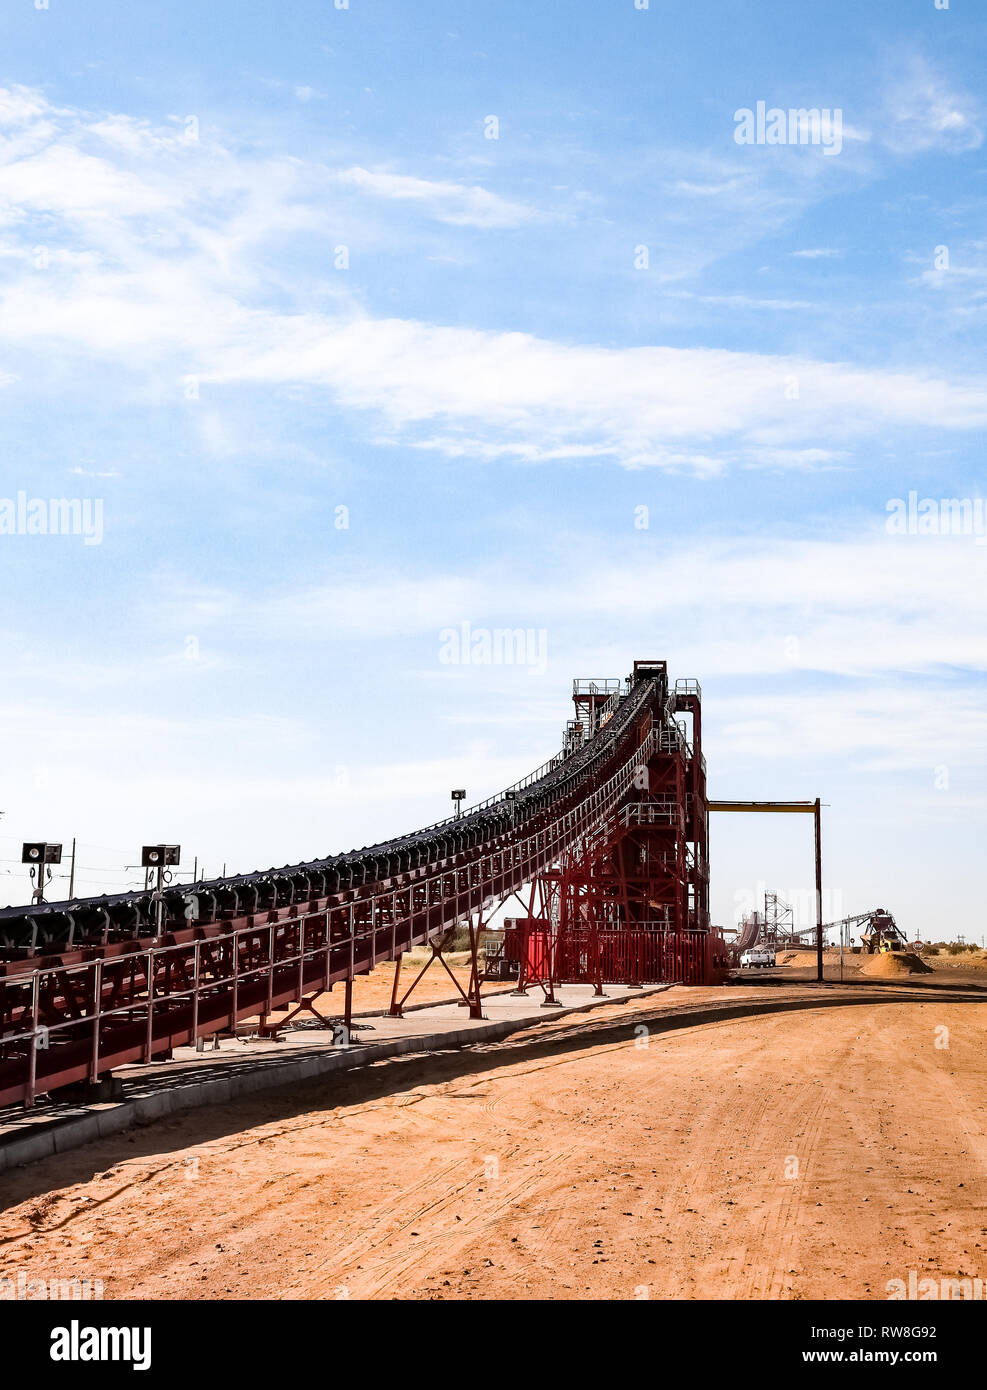 Johannesburg, South Africa - April 20 2012: Manganese Mining and Equipment Stock Photo